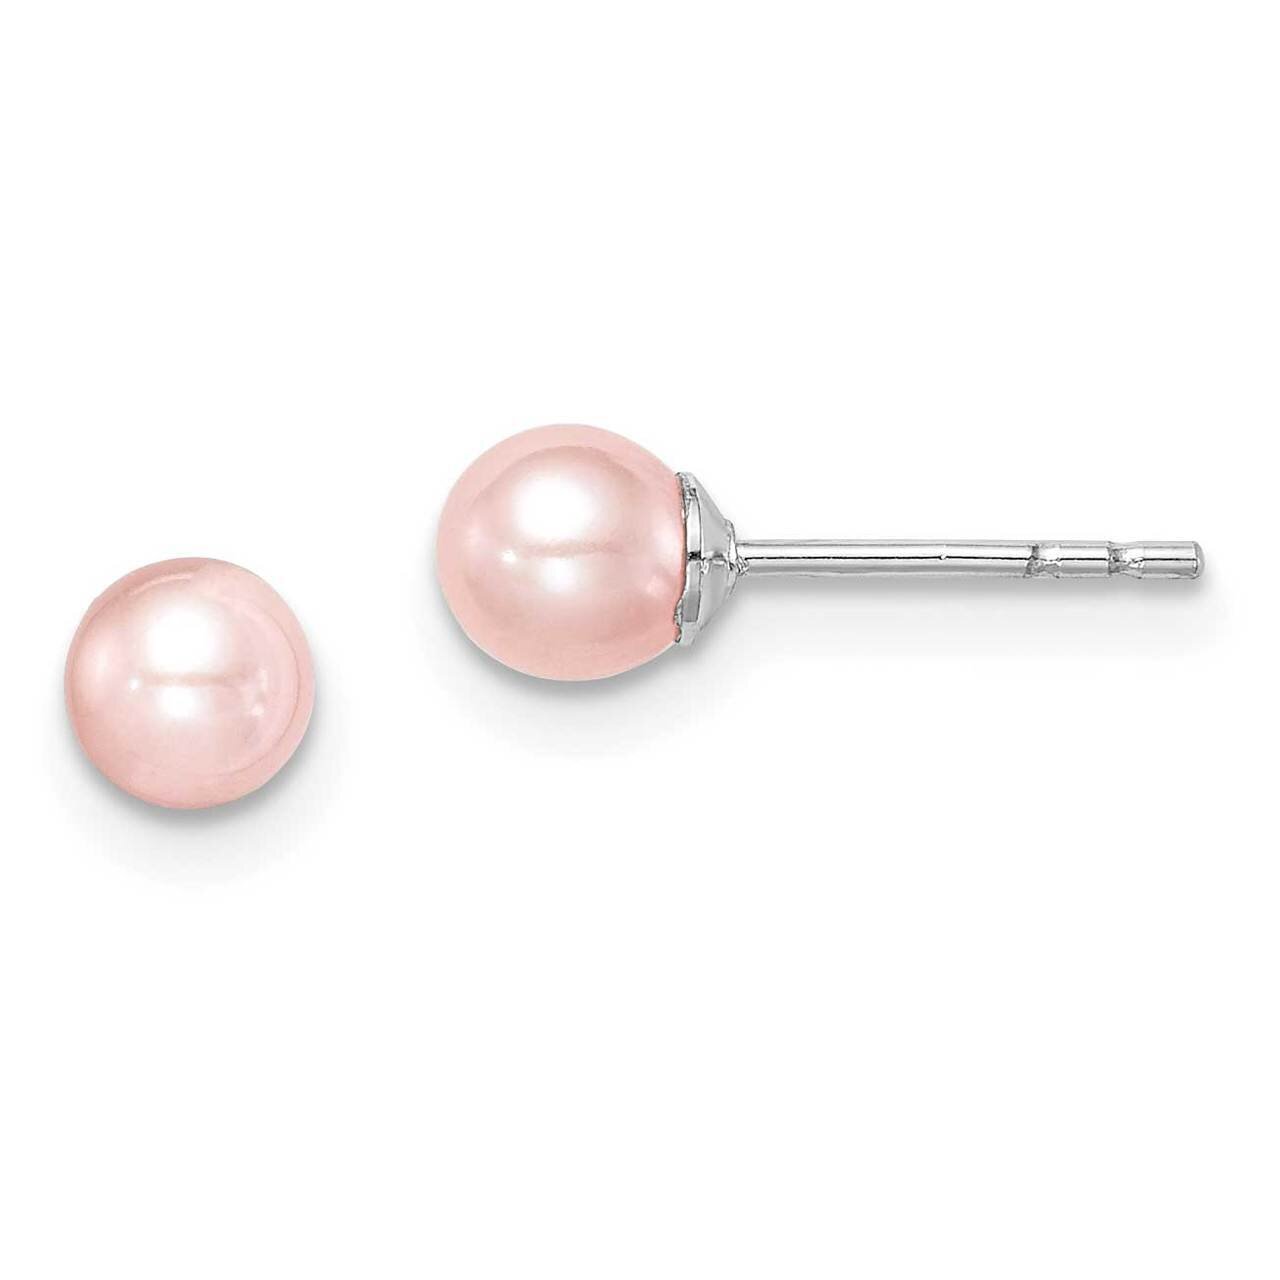 4-5mm Pink Round Freshwater Cultured Pearl Stud Earrings Sterling Silver Rhodium Plated QE15339